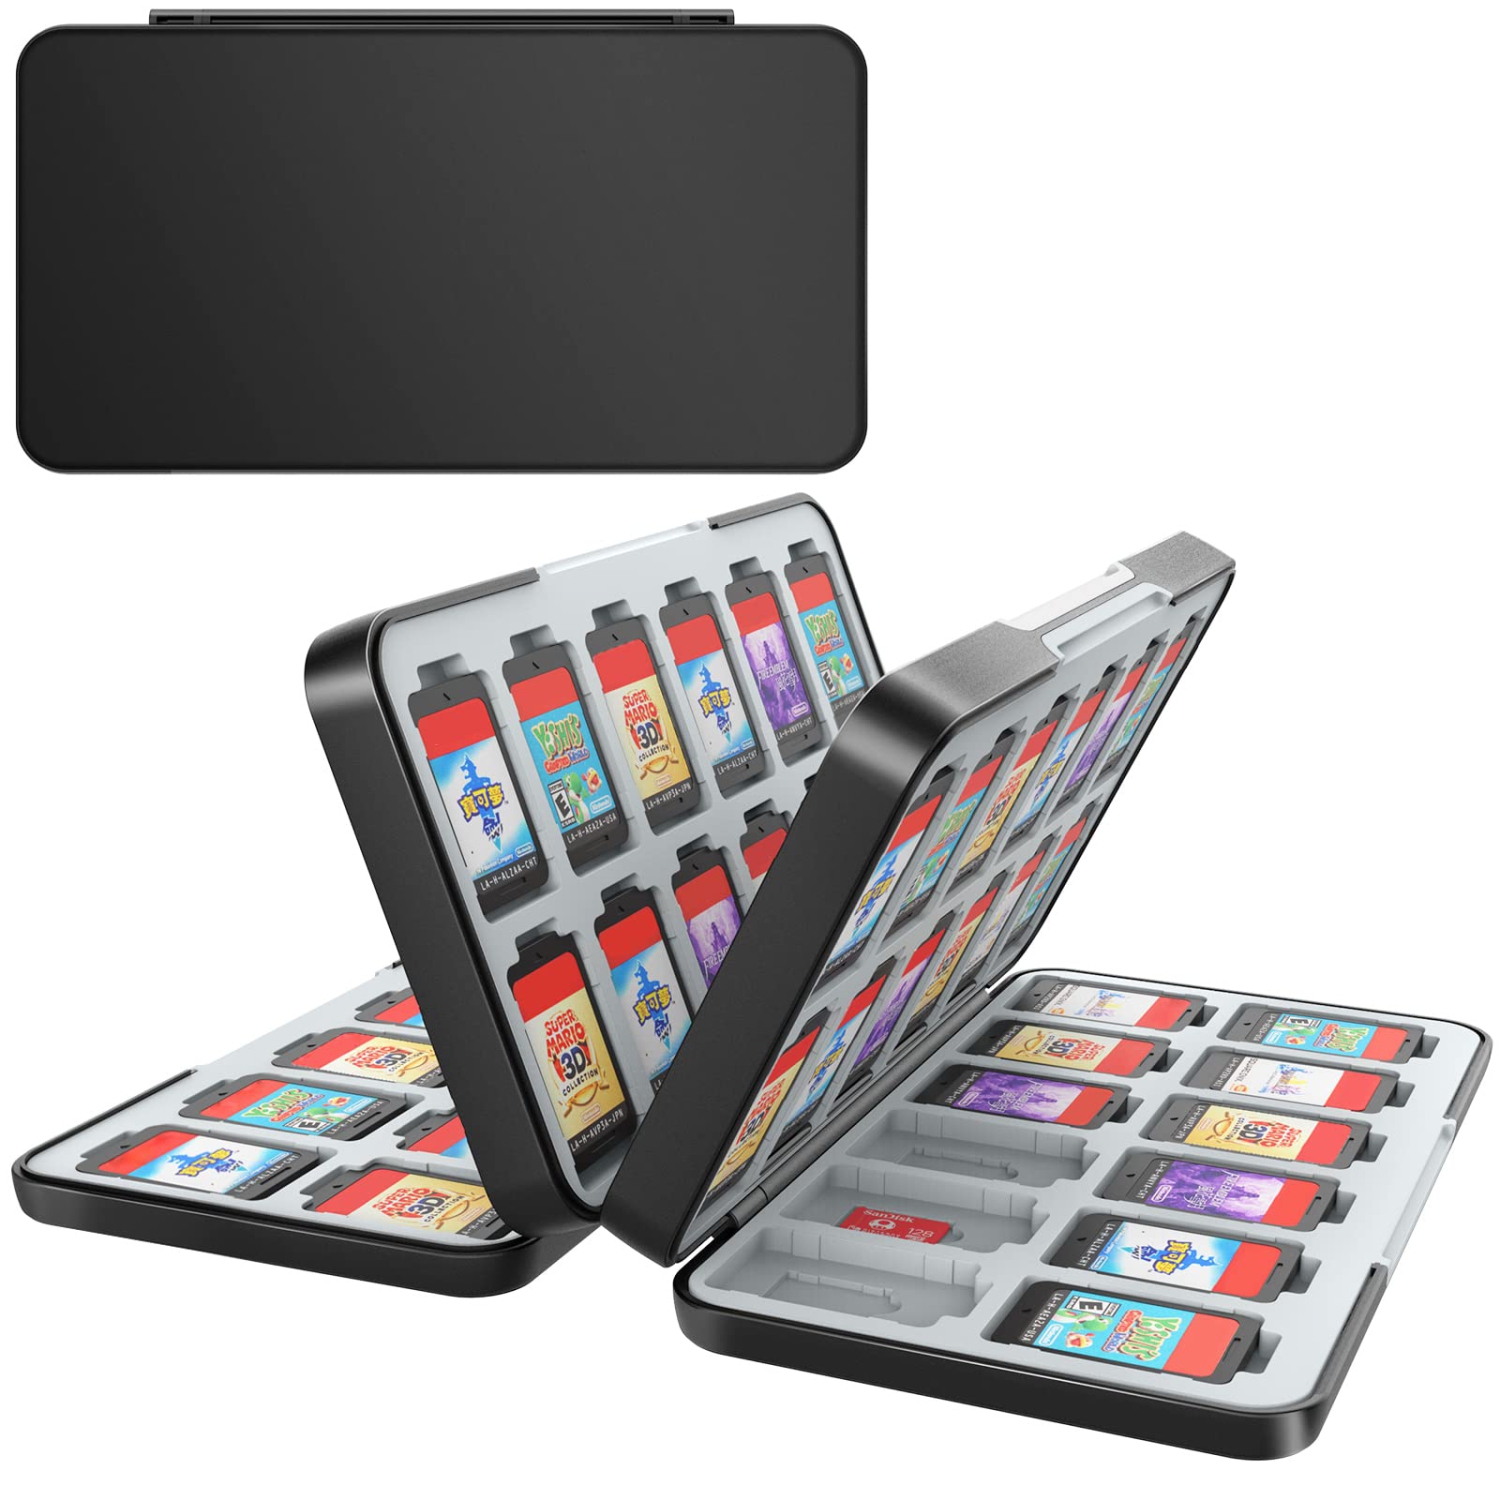 Game Card Case for Nintendo Switch Game Card or Micro SD Memory Cards,Portable Switch Game Card Storage with 72 Game Card Slots and 24 Micro SD Card Slots.